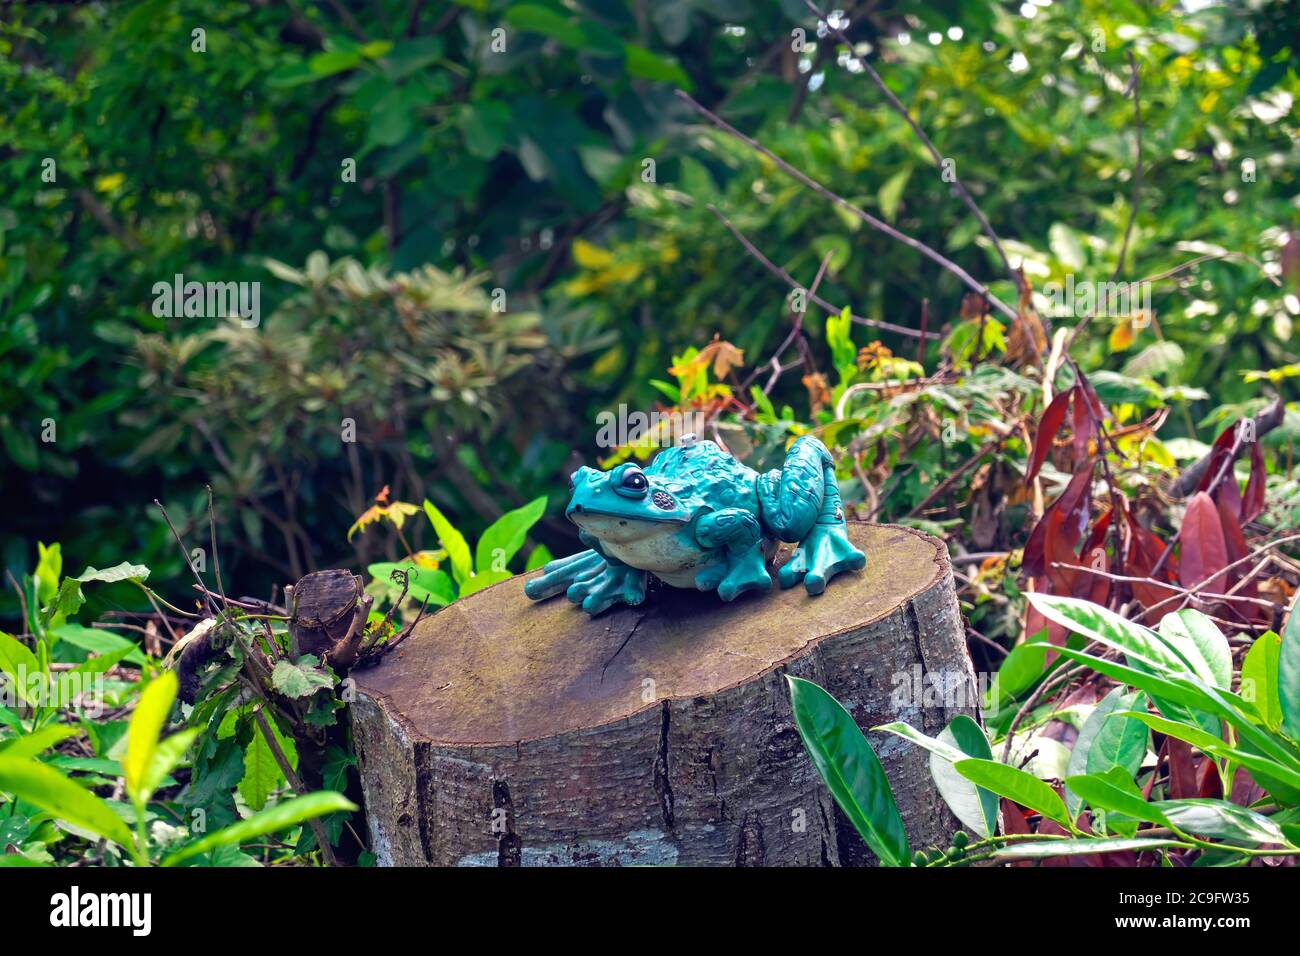 An ornamental turquoise garden frog sitting on a tree stump with shrubs in the background. Stock Photo